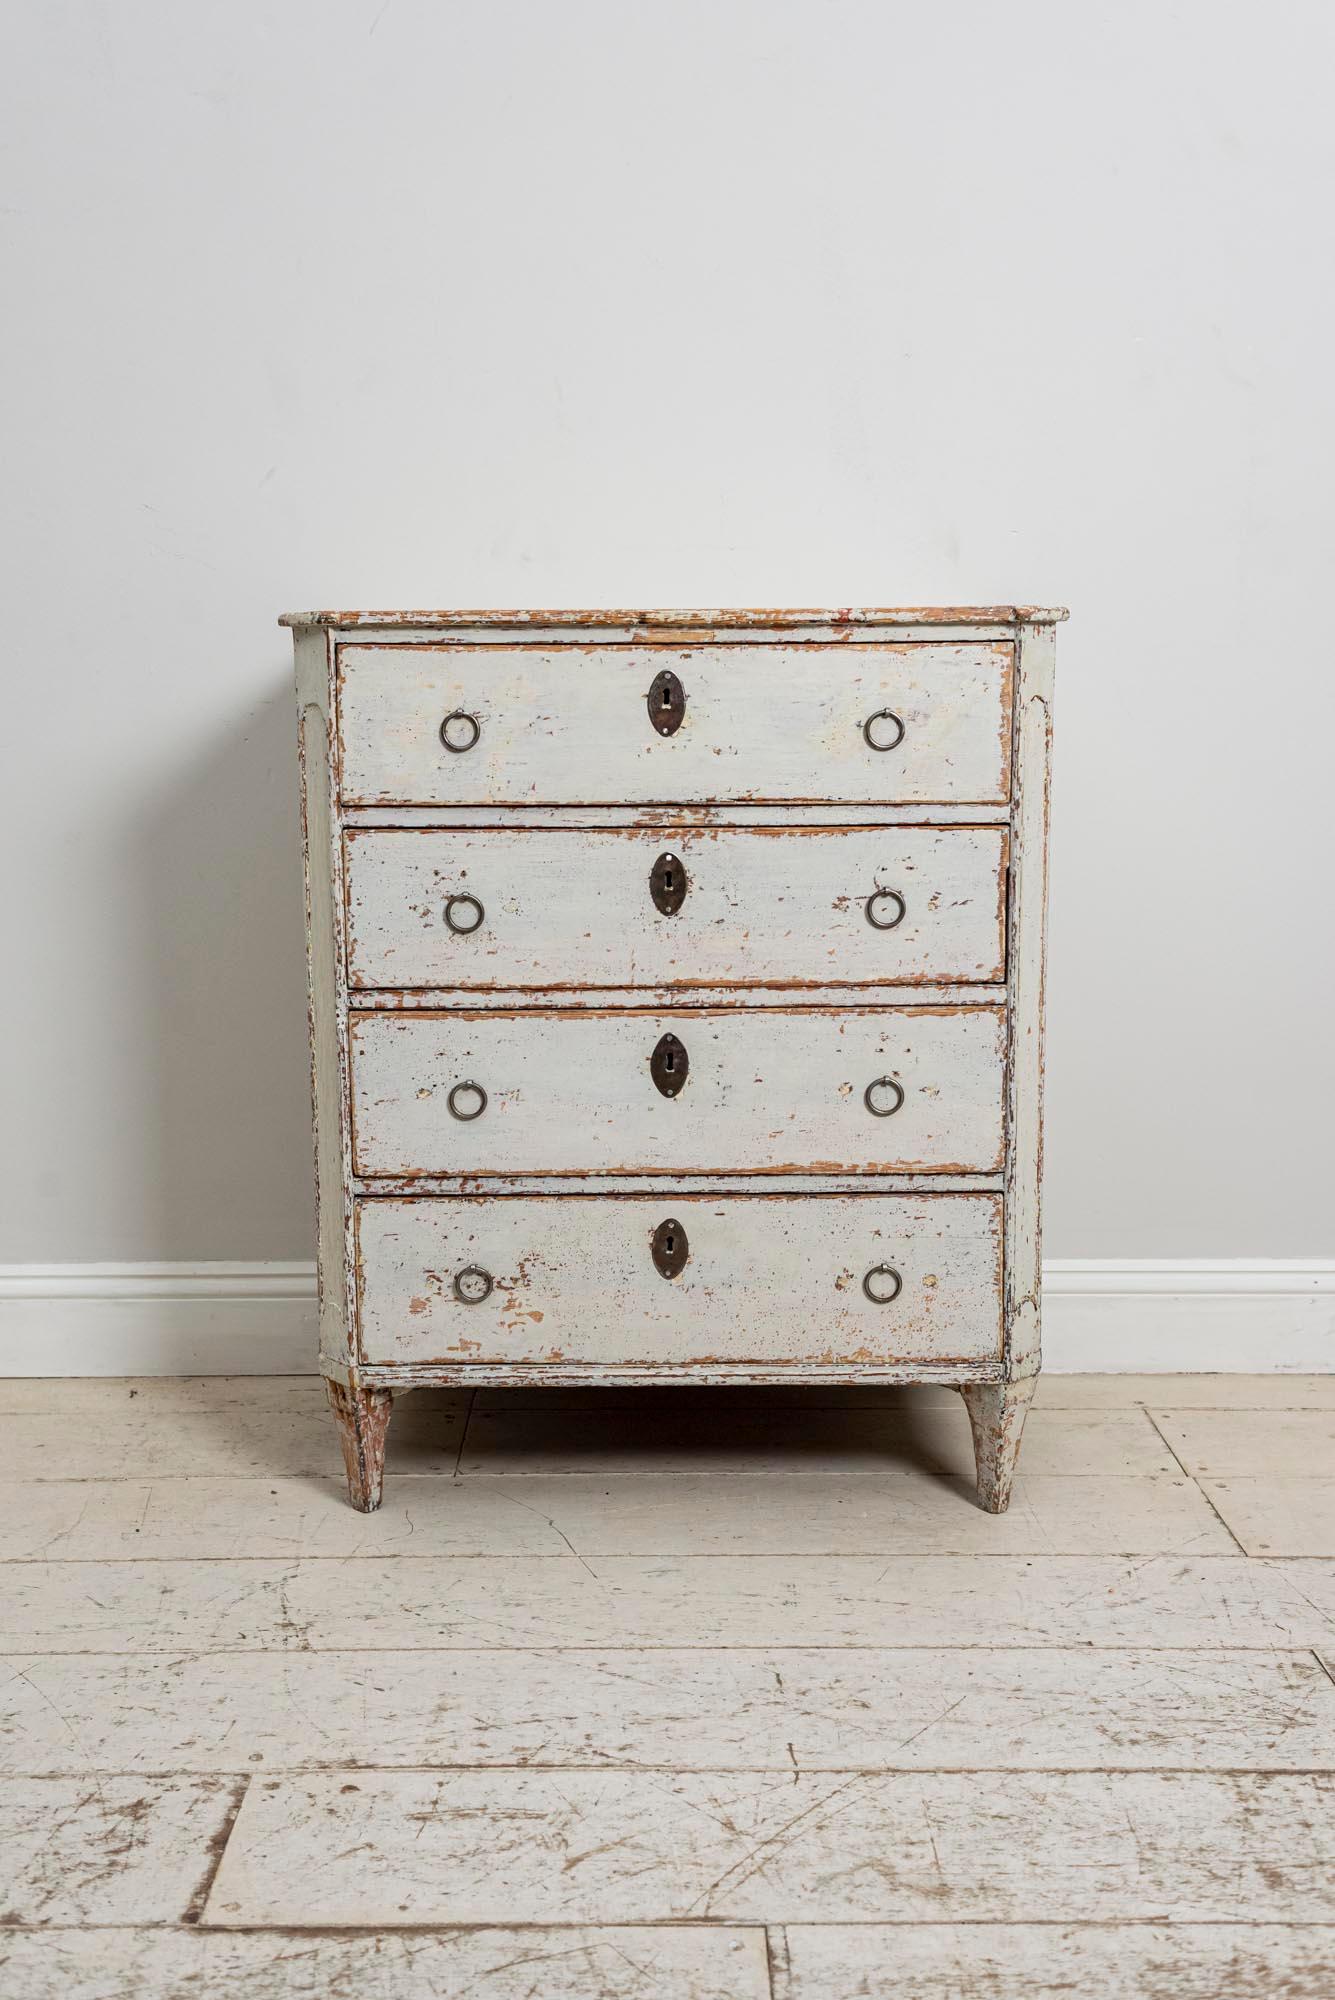 Swedish 18th Century Gustavian Painted Four-Drawer Commode with a Concealed Bureau